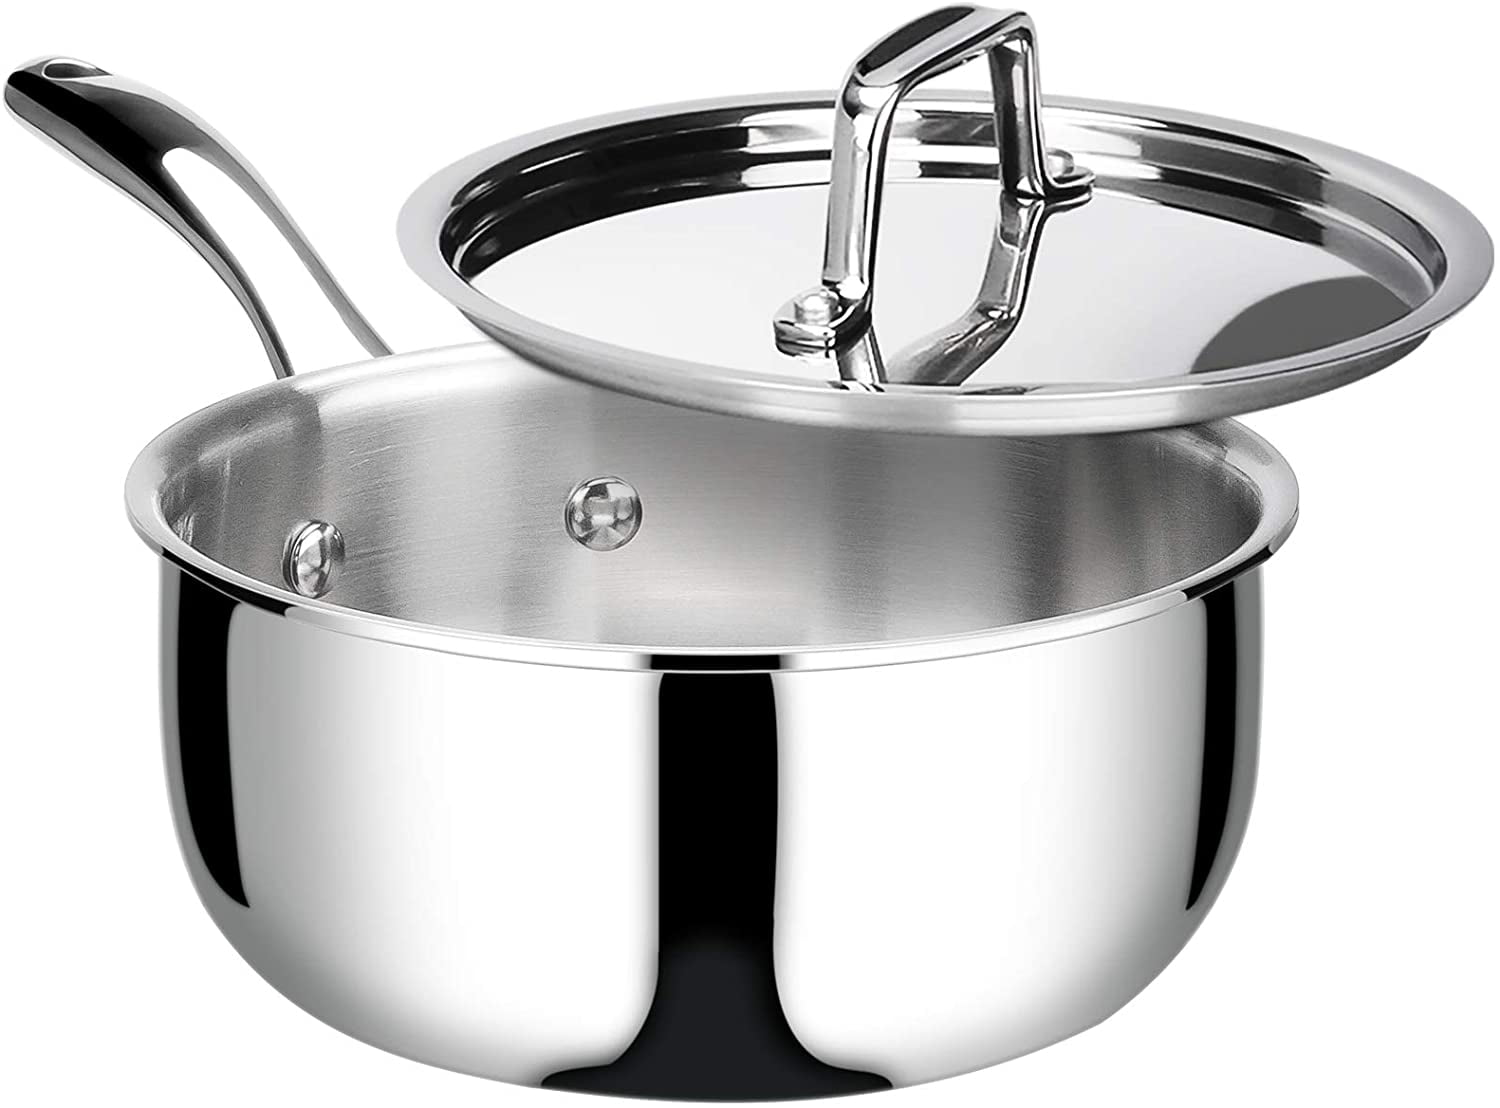 Details about   Duxtop Whole Clad Tri Ply Stainless Steel Saucepan only 3 Quart Induction 